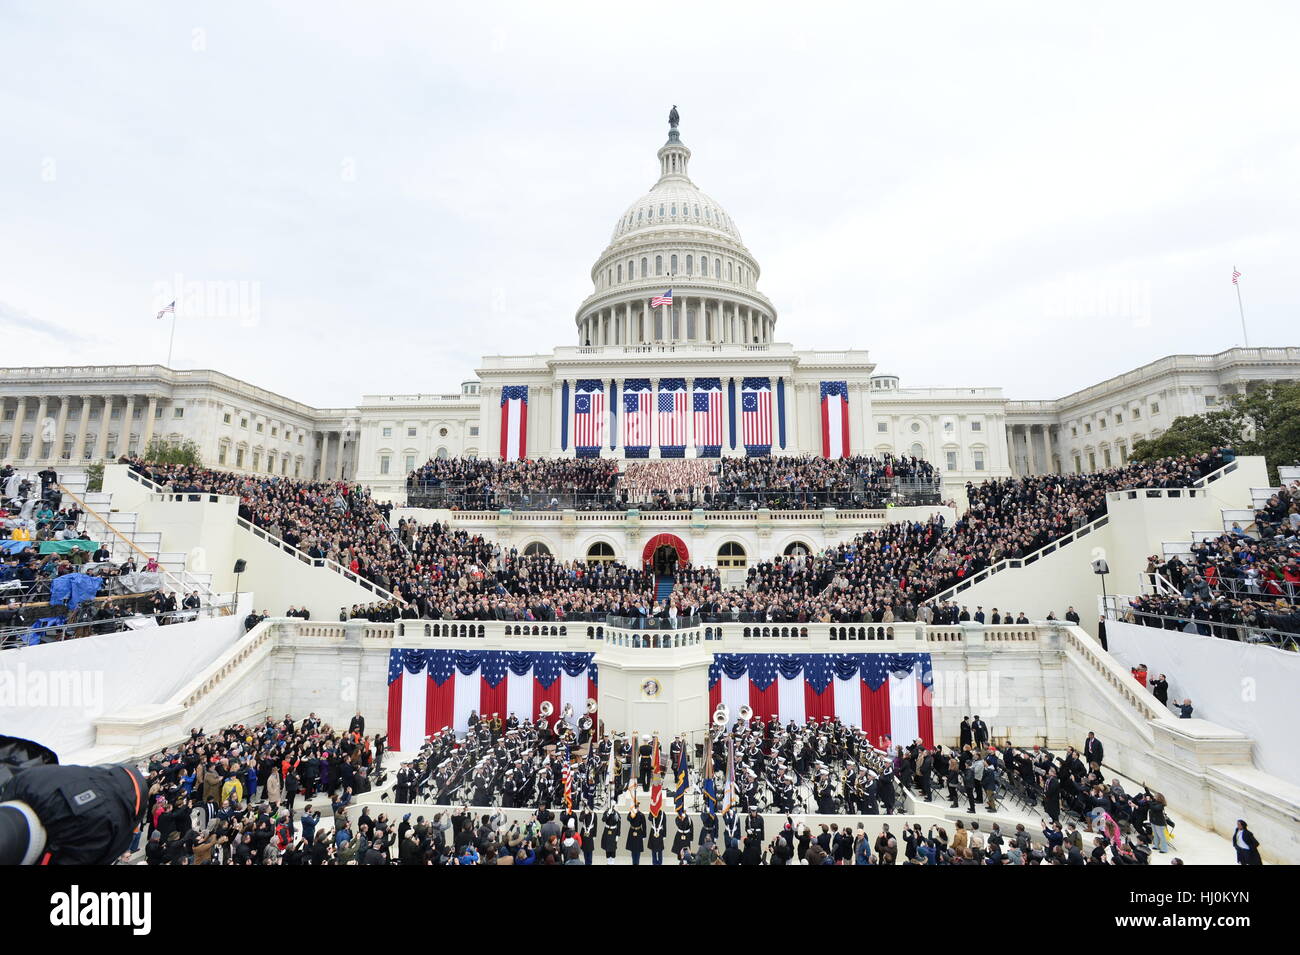 President Donald Trump takes the Oath of Office at his inauguration on January 20, 2017 in Washington, DC Trump became the 45th President of the United States. Photo by Pat Benic/UPI - NO WIRE SERVICE- Photo: Pat Benic/Consolidated/dpa Stock Photo